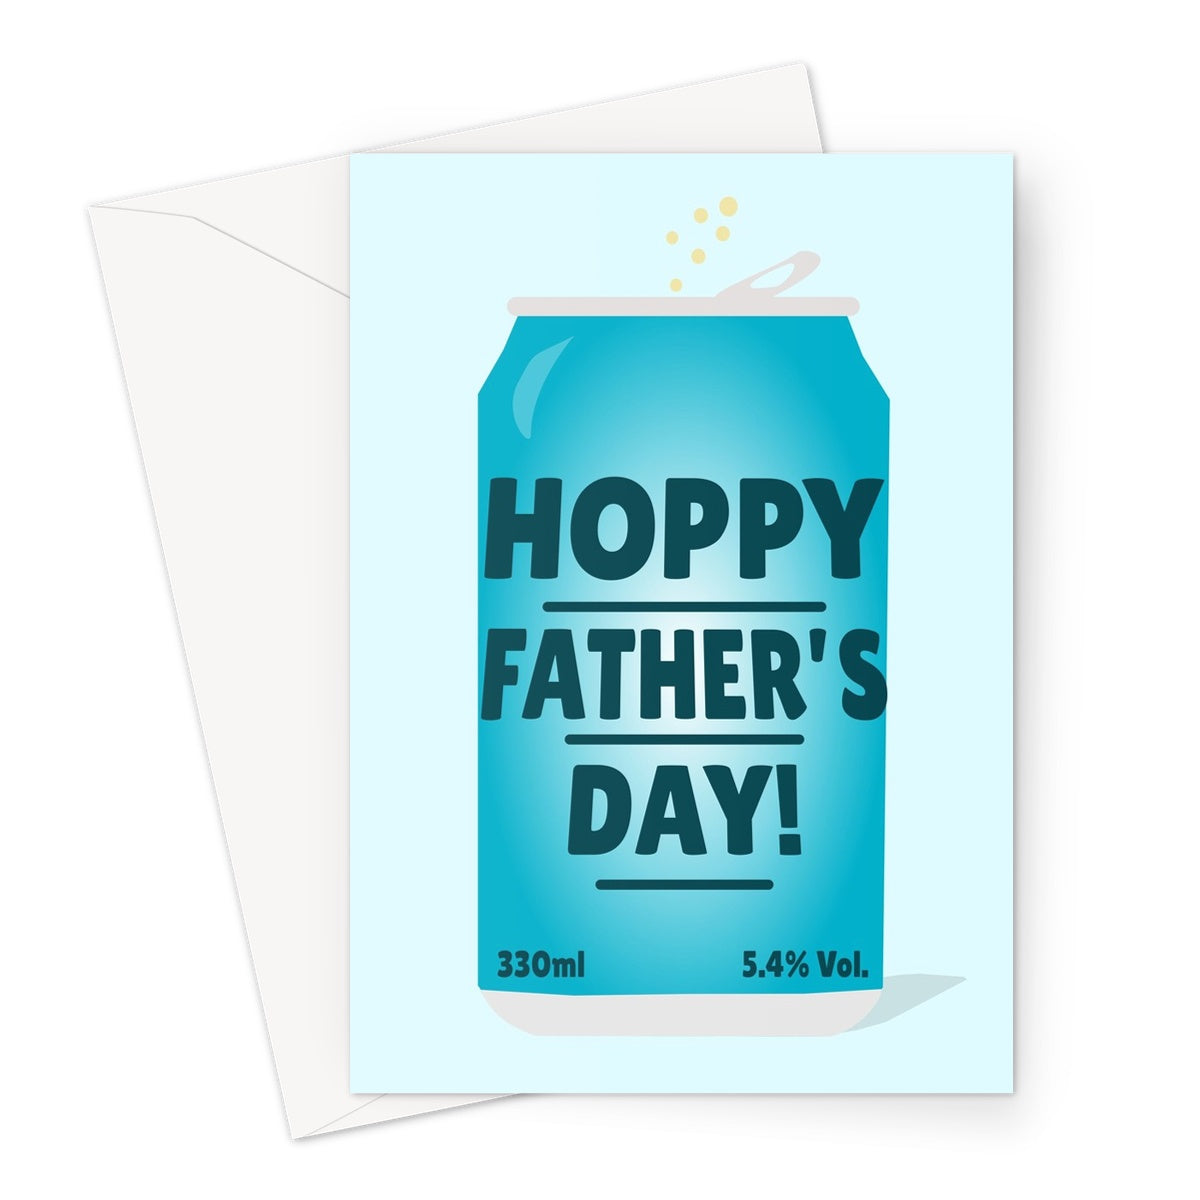 Hoppy Father's Day Craft Beer Pale Ale Wheat Love Fan Drink Alcohol Hops Pub Bar  Greeting Card